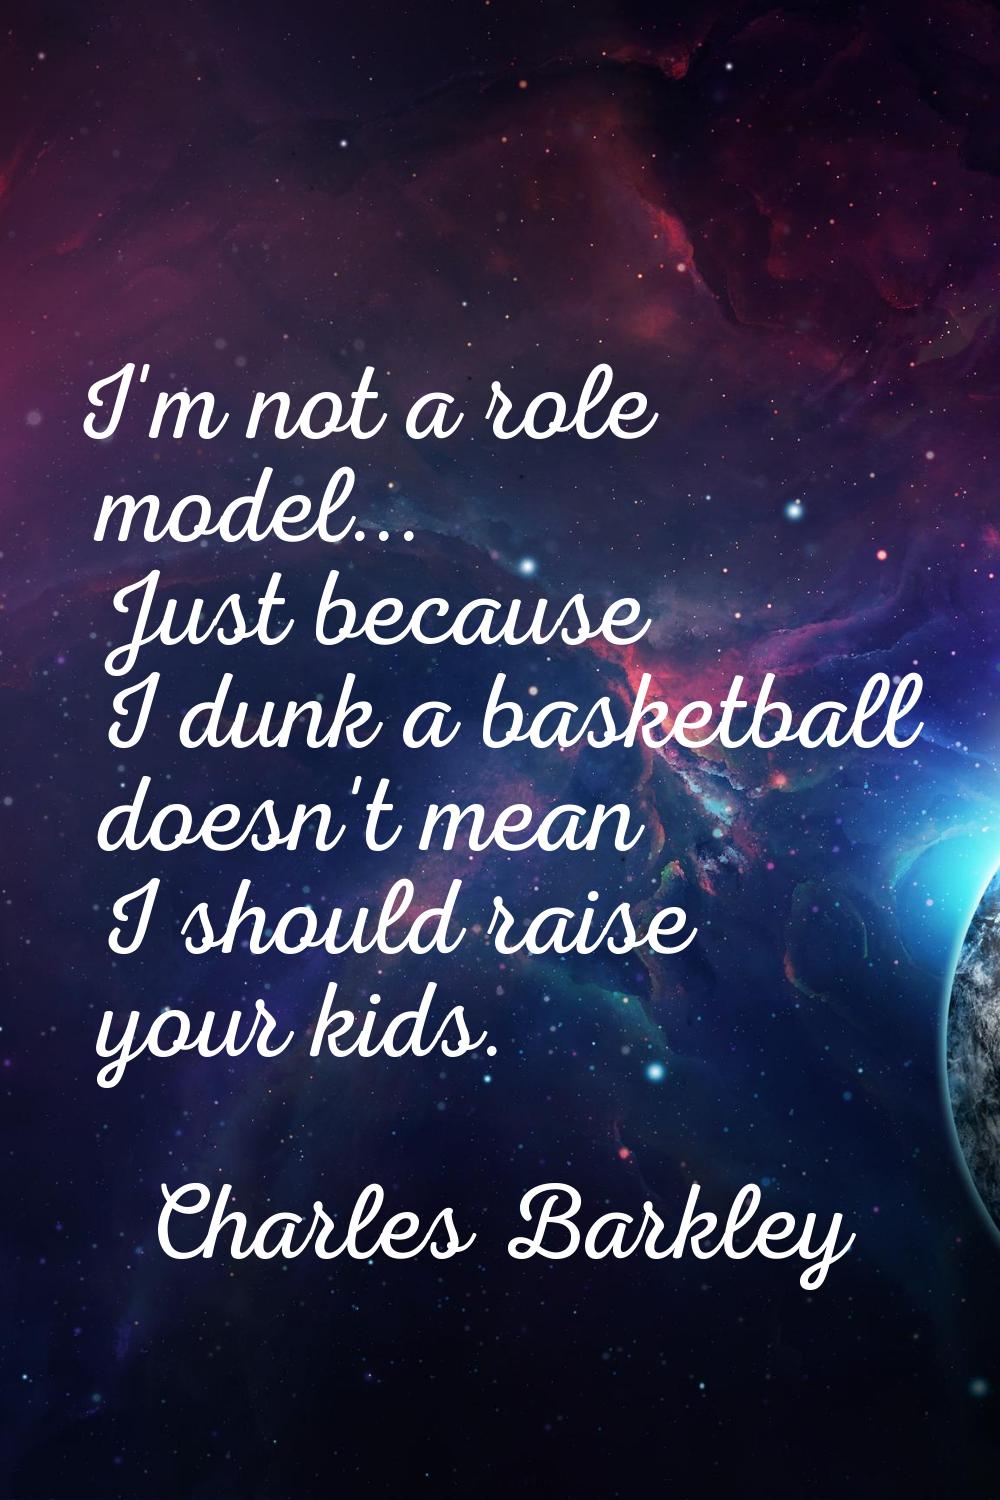 I'm not a role model... Just because I dunk a basketball doesn't mean I should raise your kids.